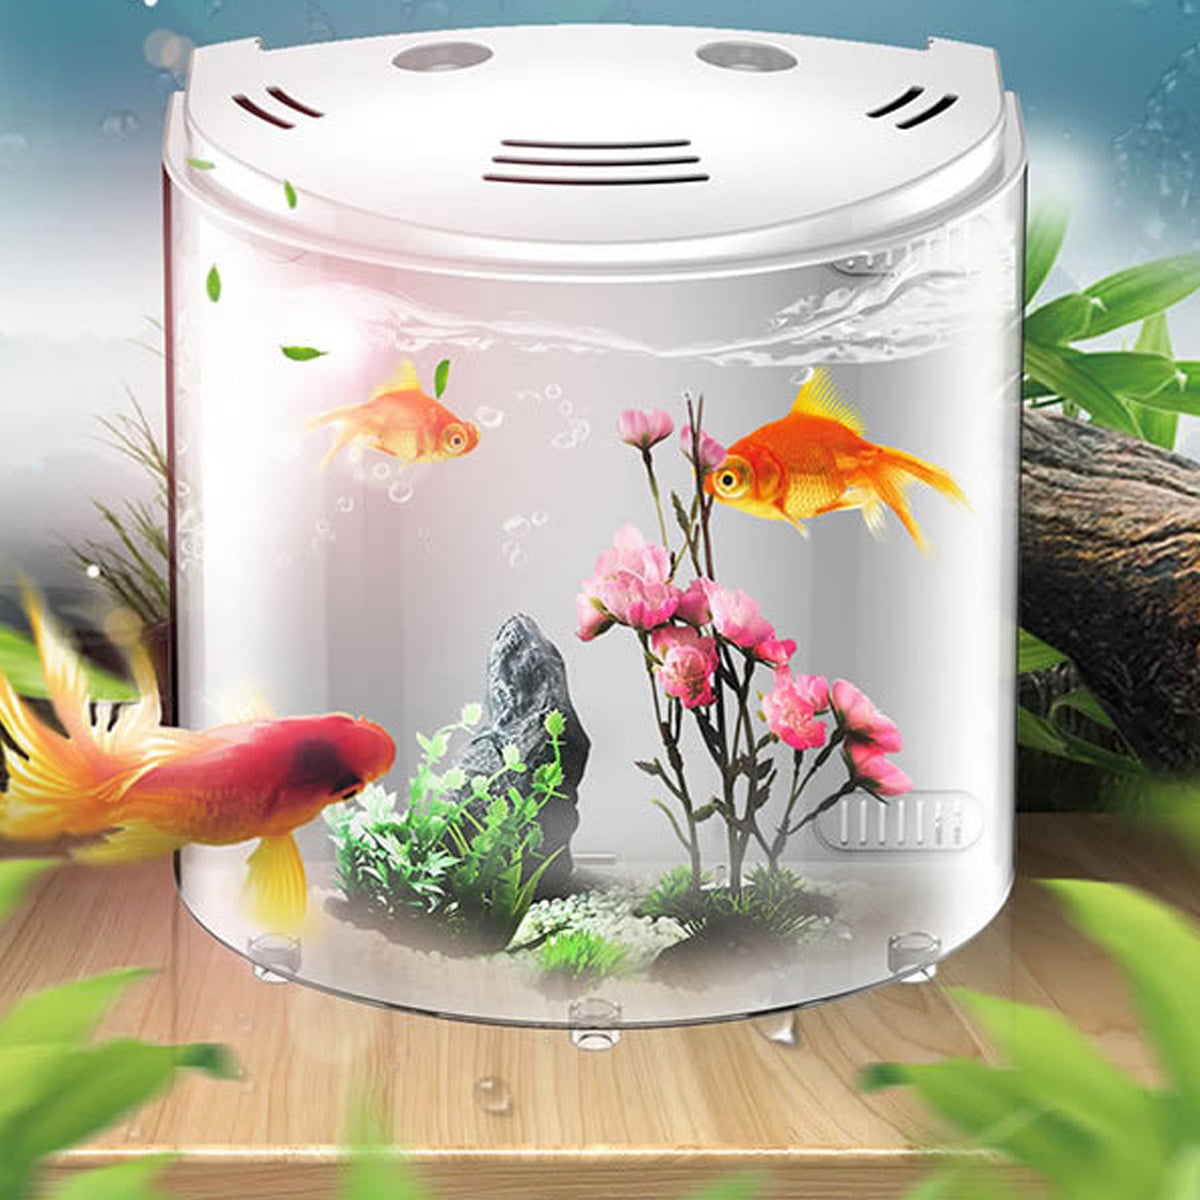 Blue Betta Bowl Aquarium Kit,Betta Starter Toy for Fish Tank,Multi Color LED Light Swimming Fish Tank with Isolation Plate & Filter Valve,Artificial Underwater Plant Water Grass GOTDCO 